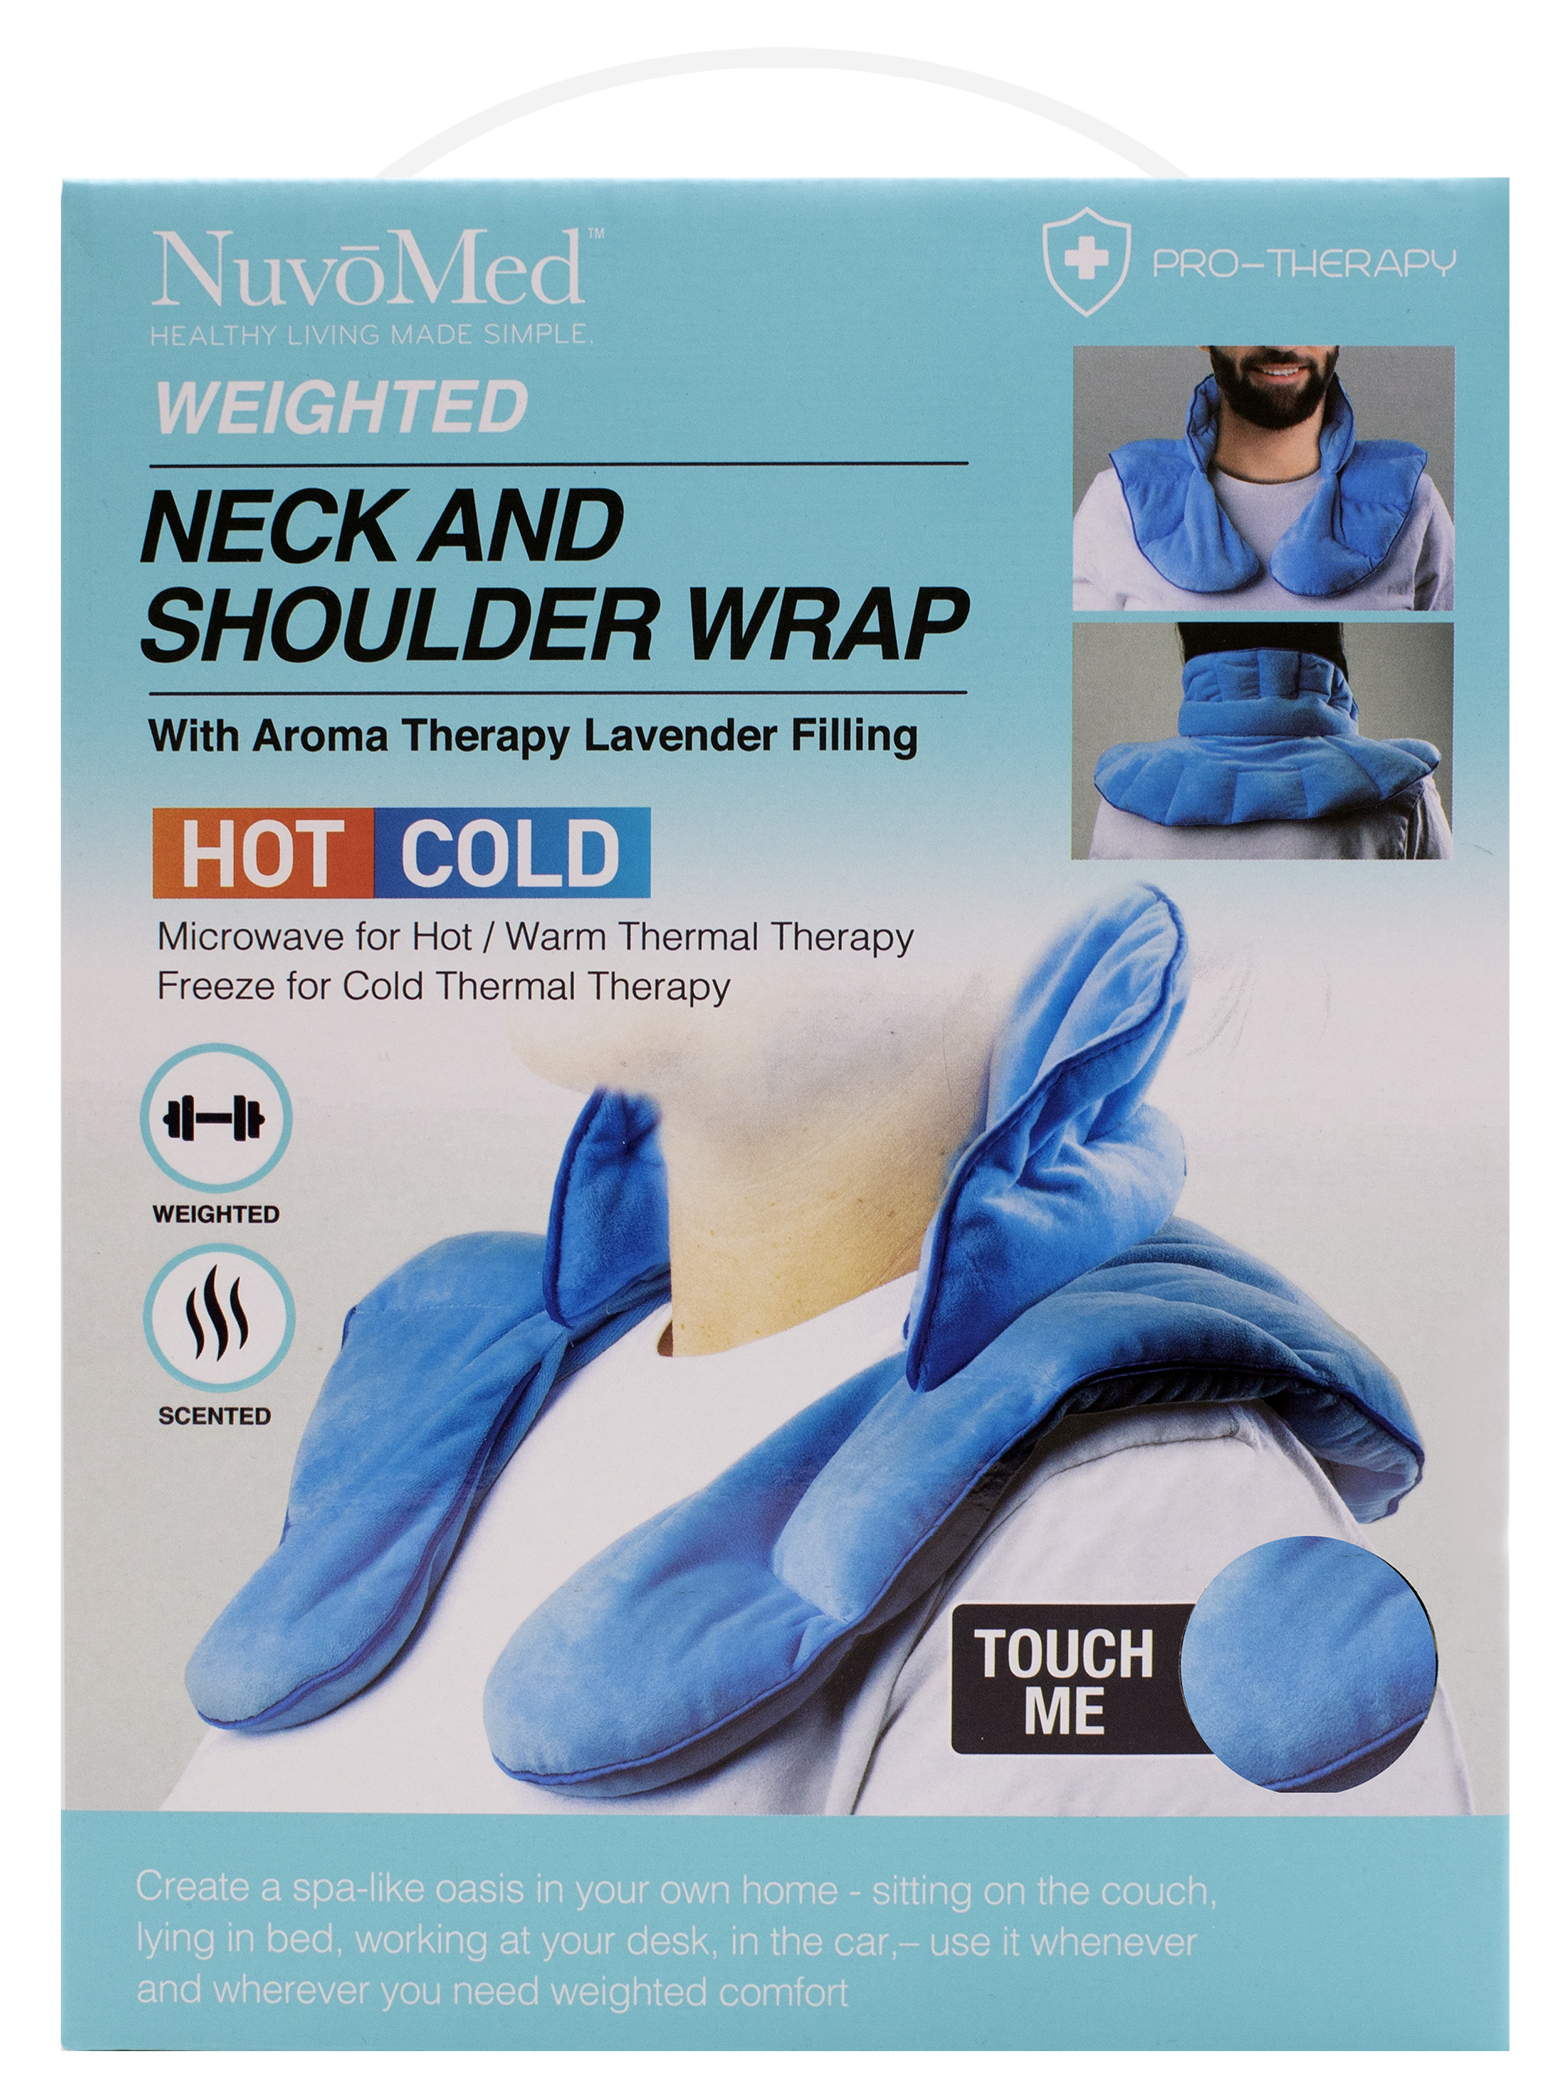 Sharper Image Heated Neck and Shoulder Aromatherapy Wrap Body Massager 1 ct